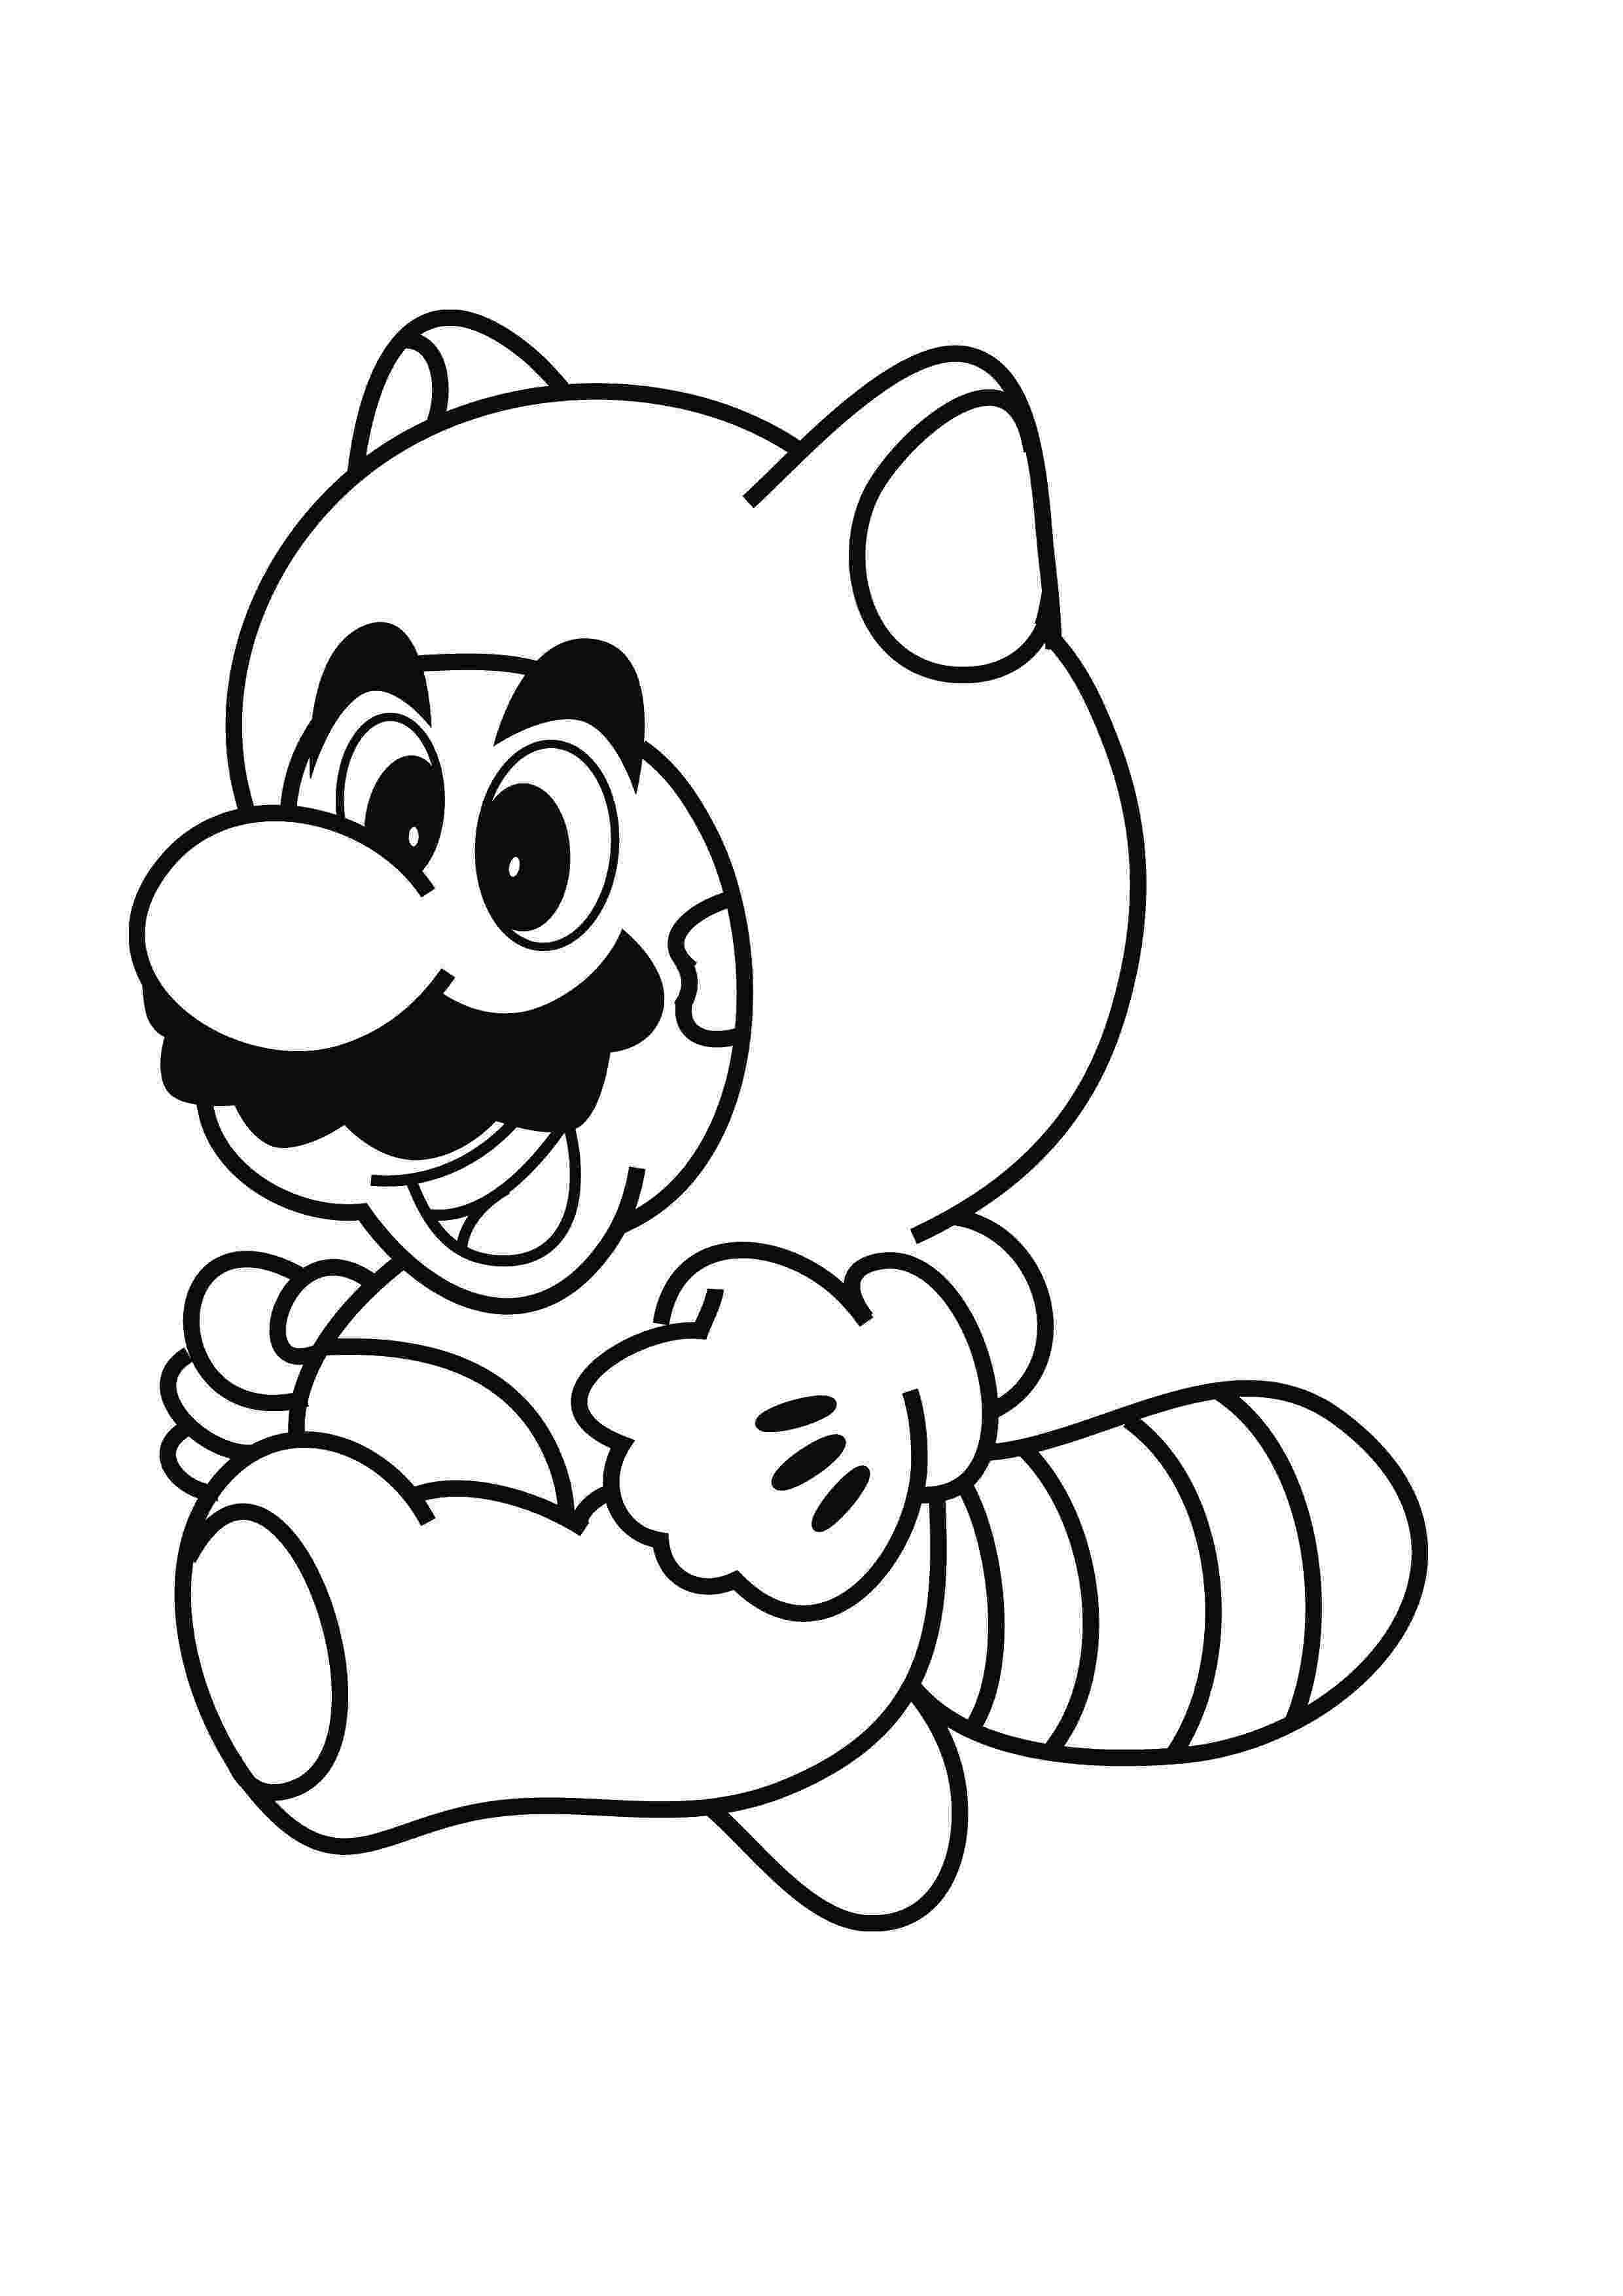 super colouring pages super mario coloring pages best coloring pages for kids pages super colouring 